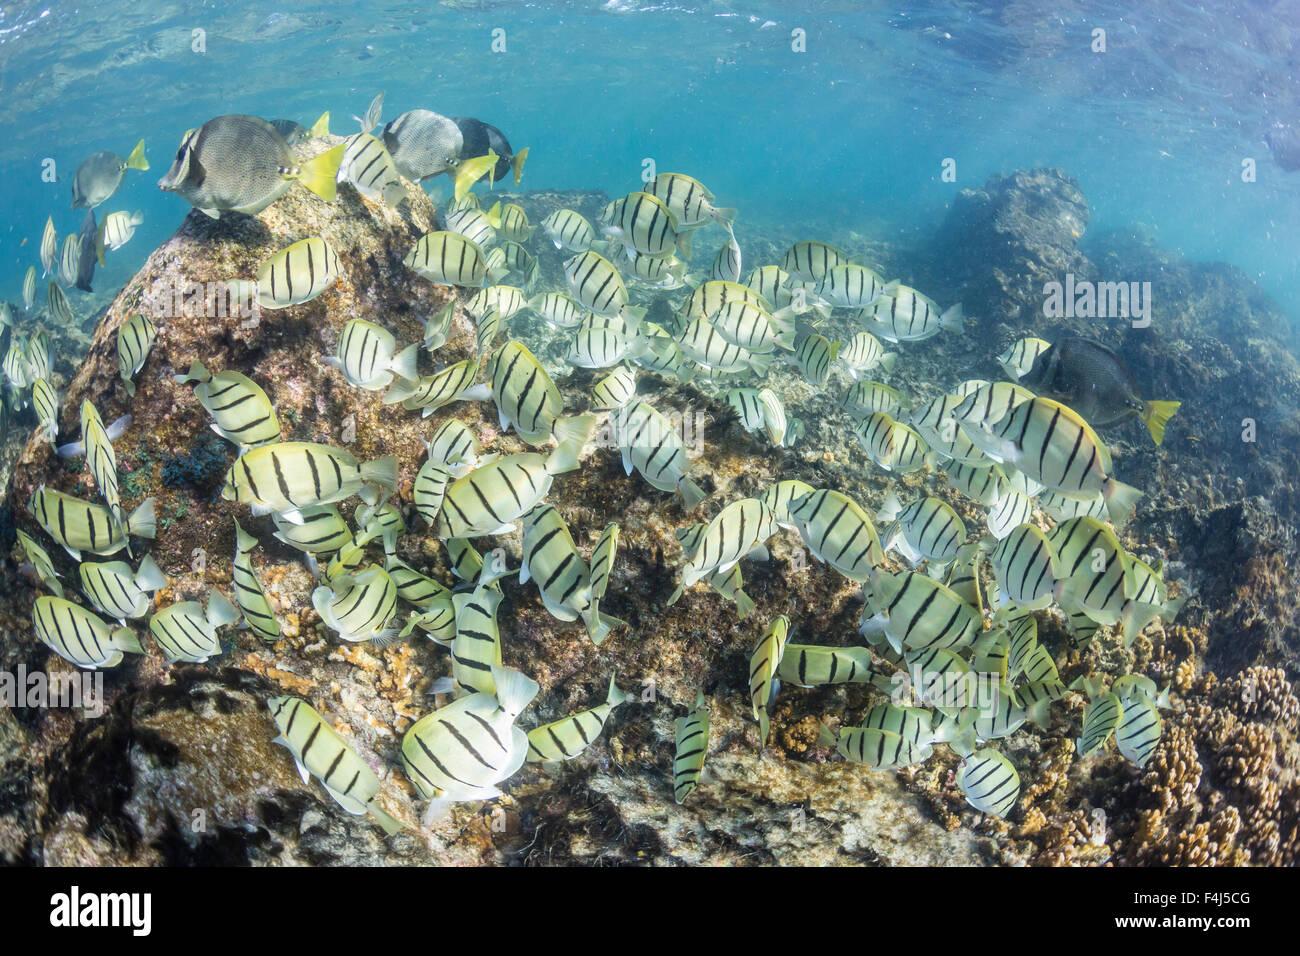 A large school of convict tang on the only living reef in the Sea of Cortez, Cabo Pulmo, Baja California Sur, Mexico Stock Photo